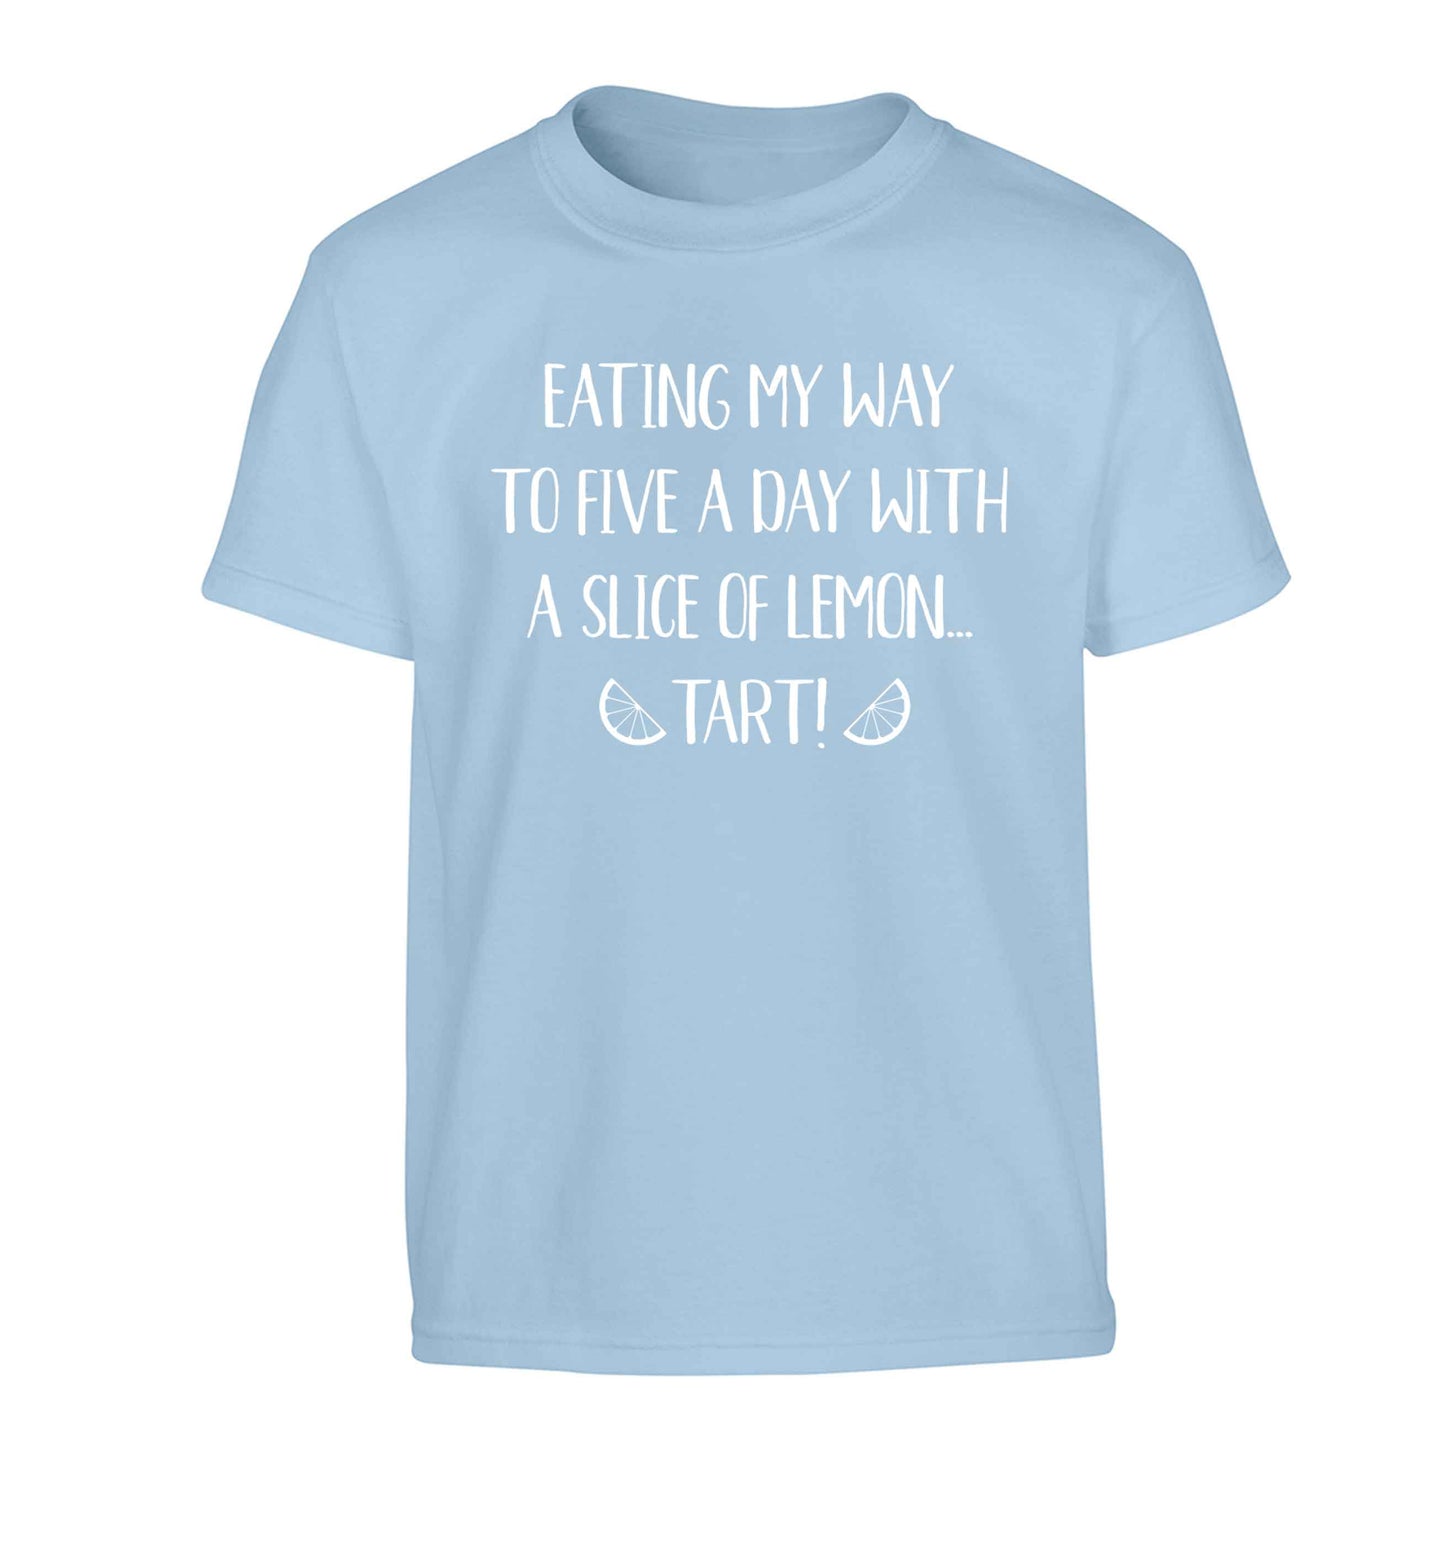 Eating my way to five a day with a slice of lemon tart Children's light blue Tshirt 12-13 Years